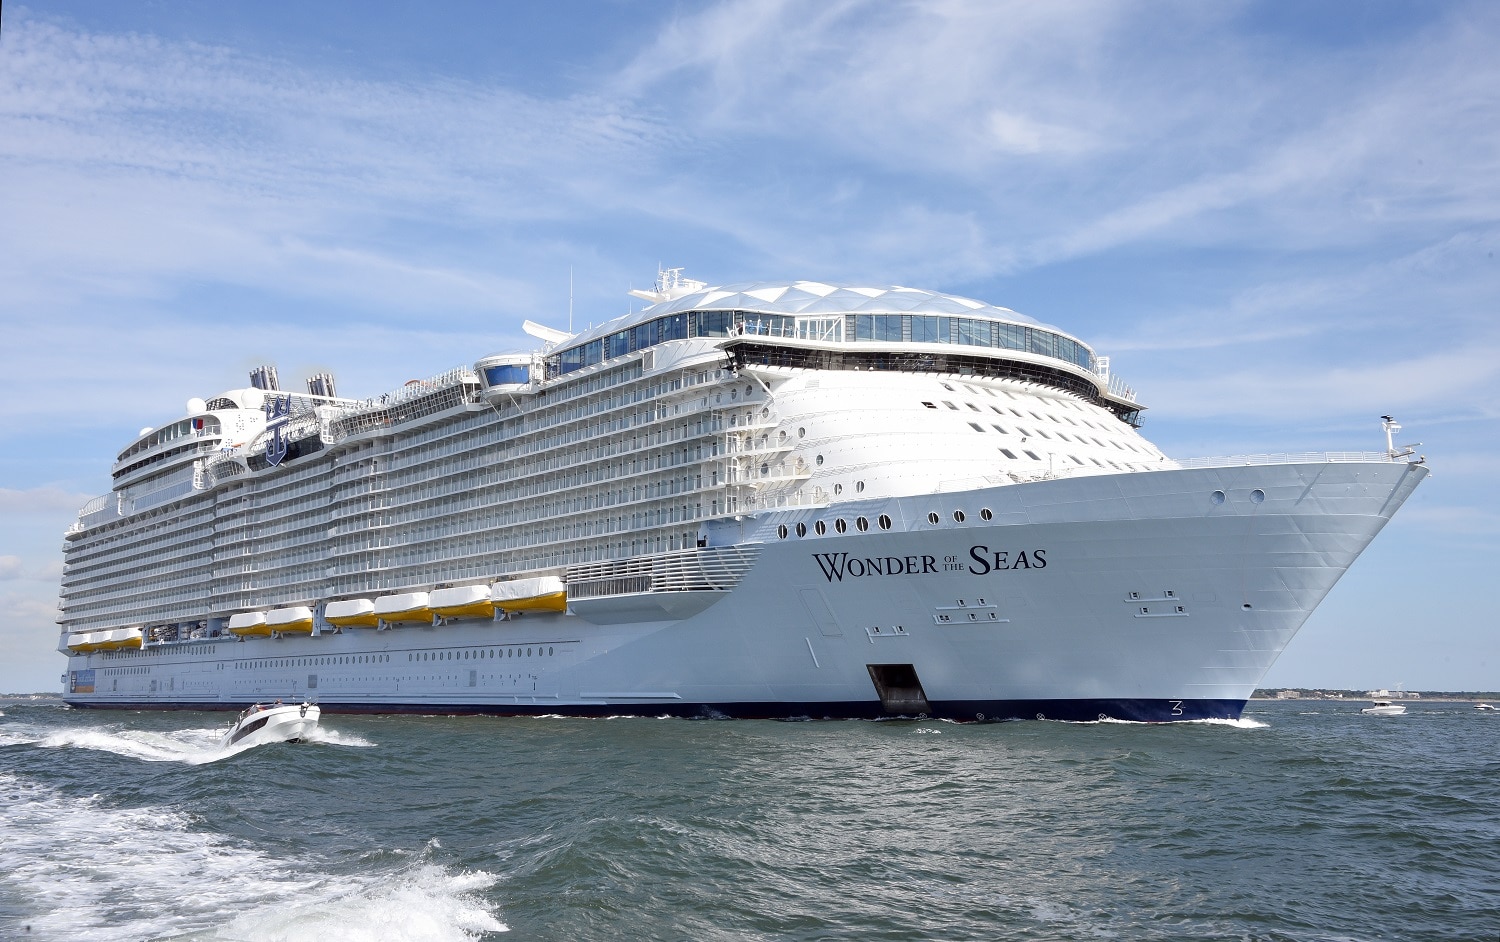 Royal Caribbean's Wonder of the Seas, World's Largest Cruise Ship, Will